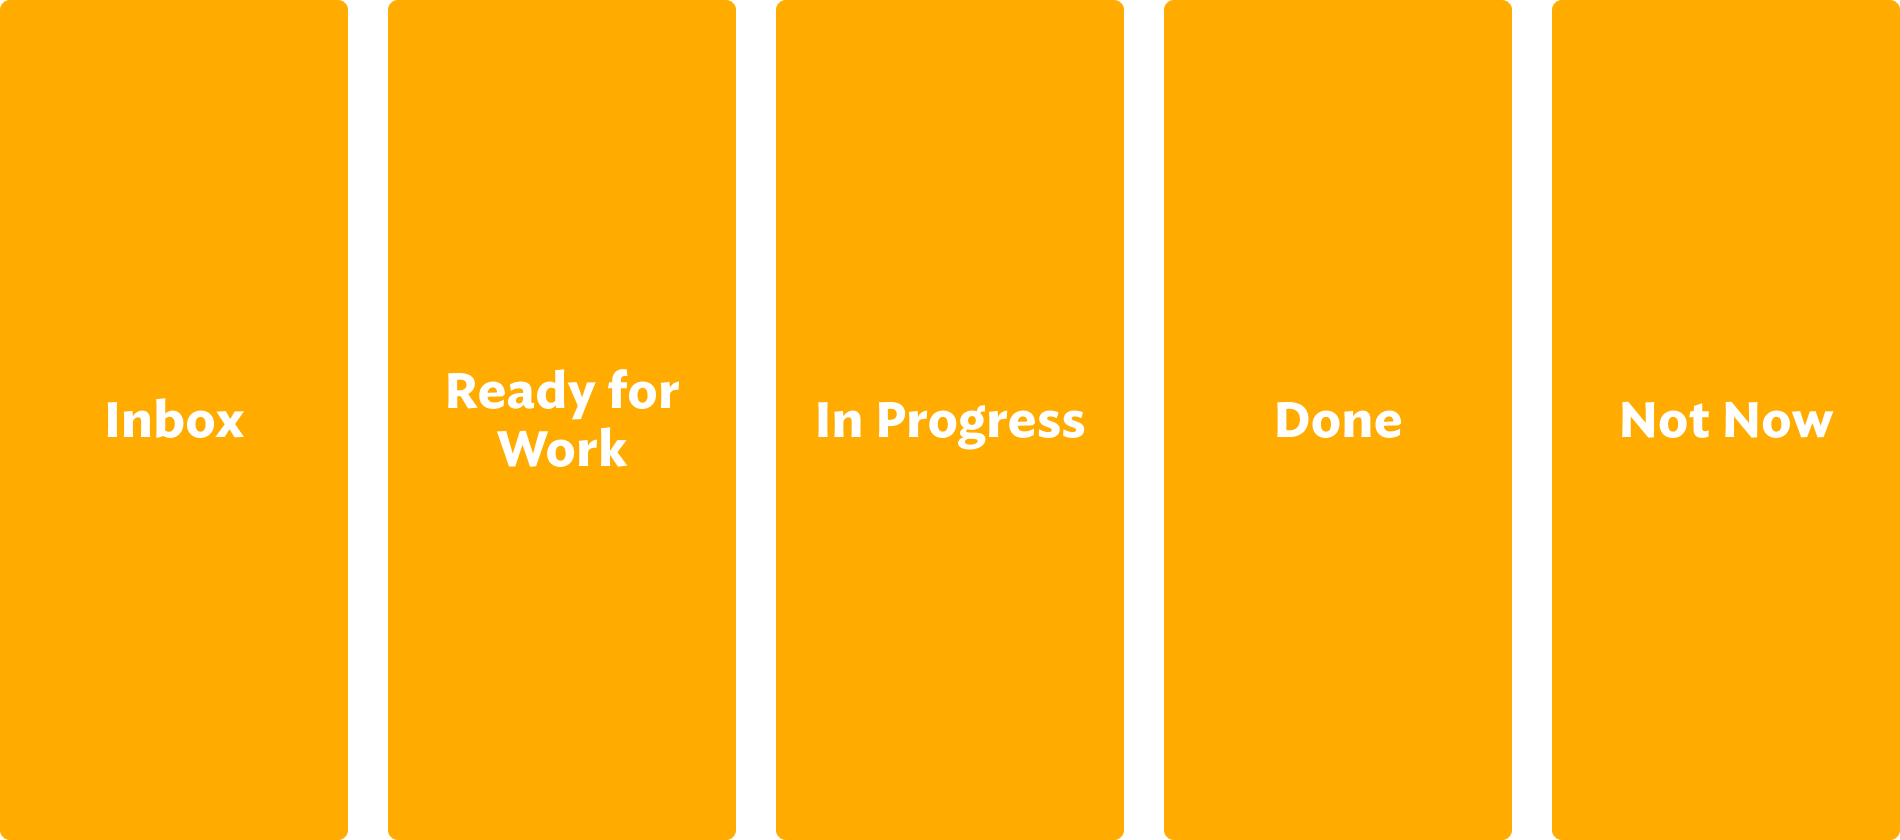 The 5 steps in a Kanban flow: Inbox, Ready for Work, In Progress, Done, and Not Now.